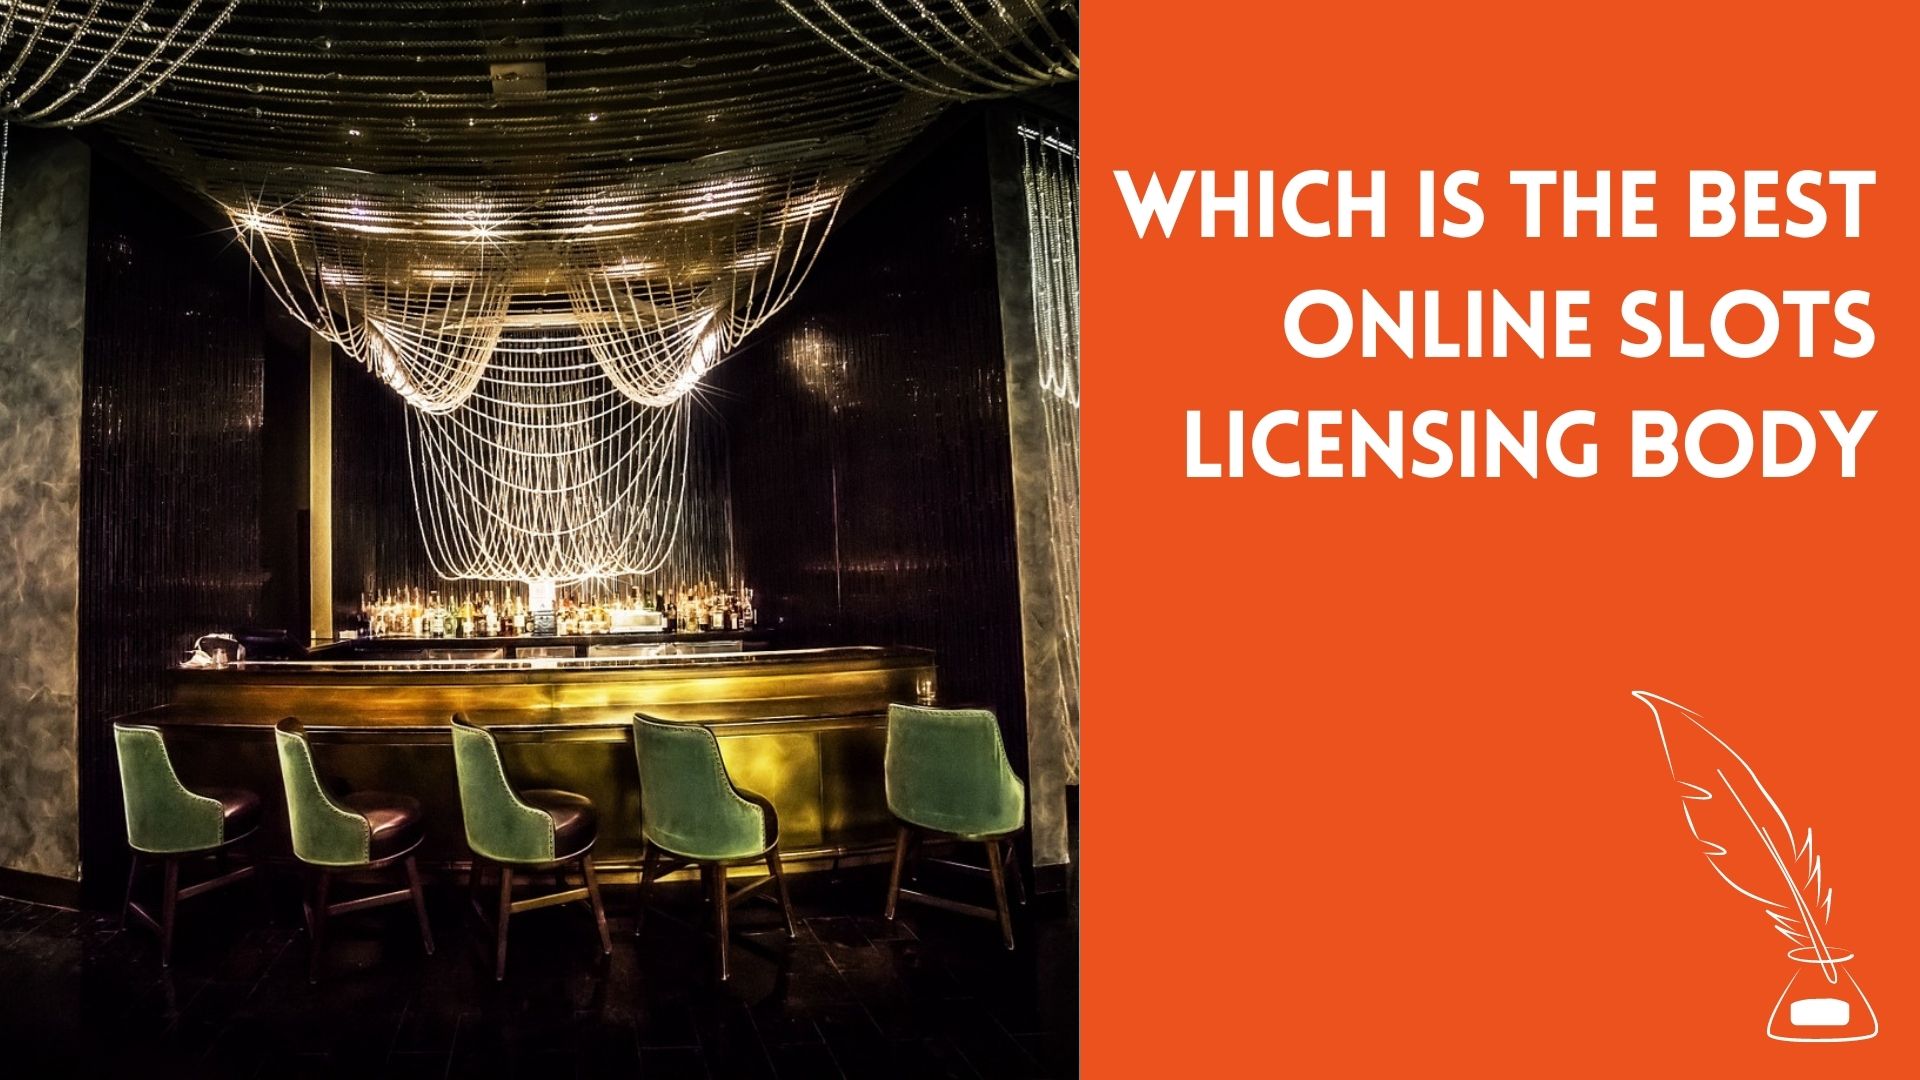 Which is the Best Online Slots Licensing Body?